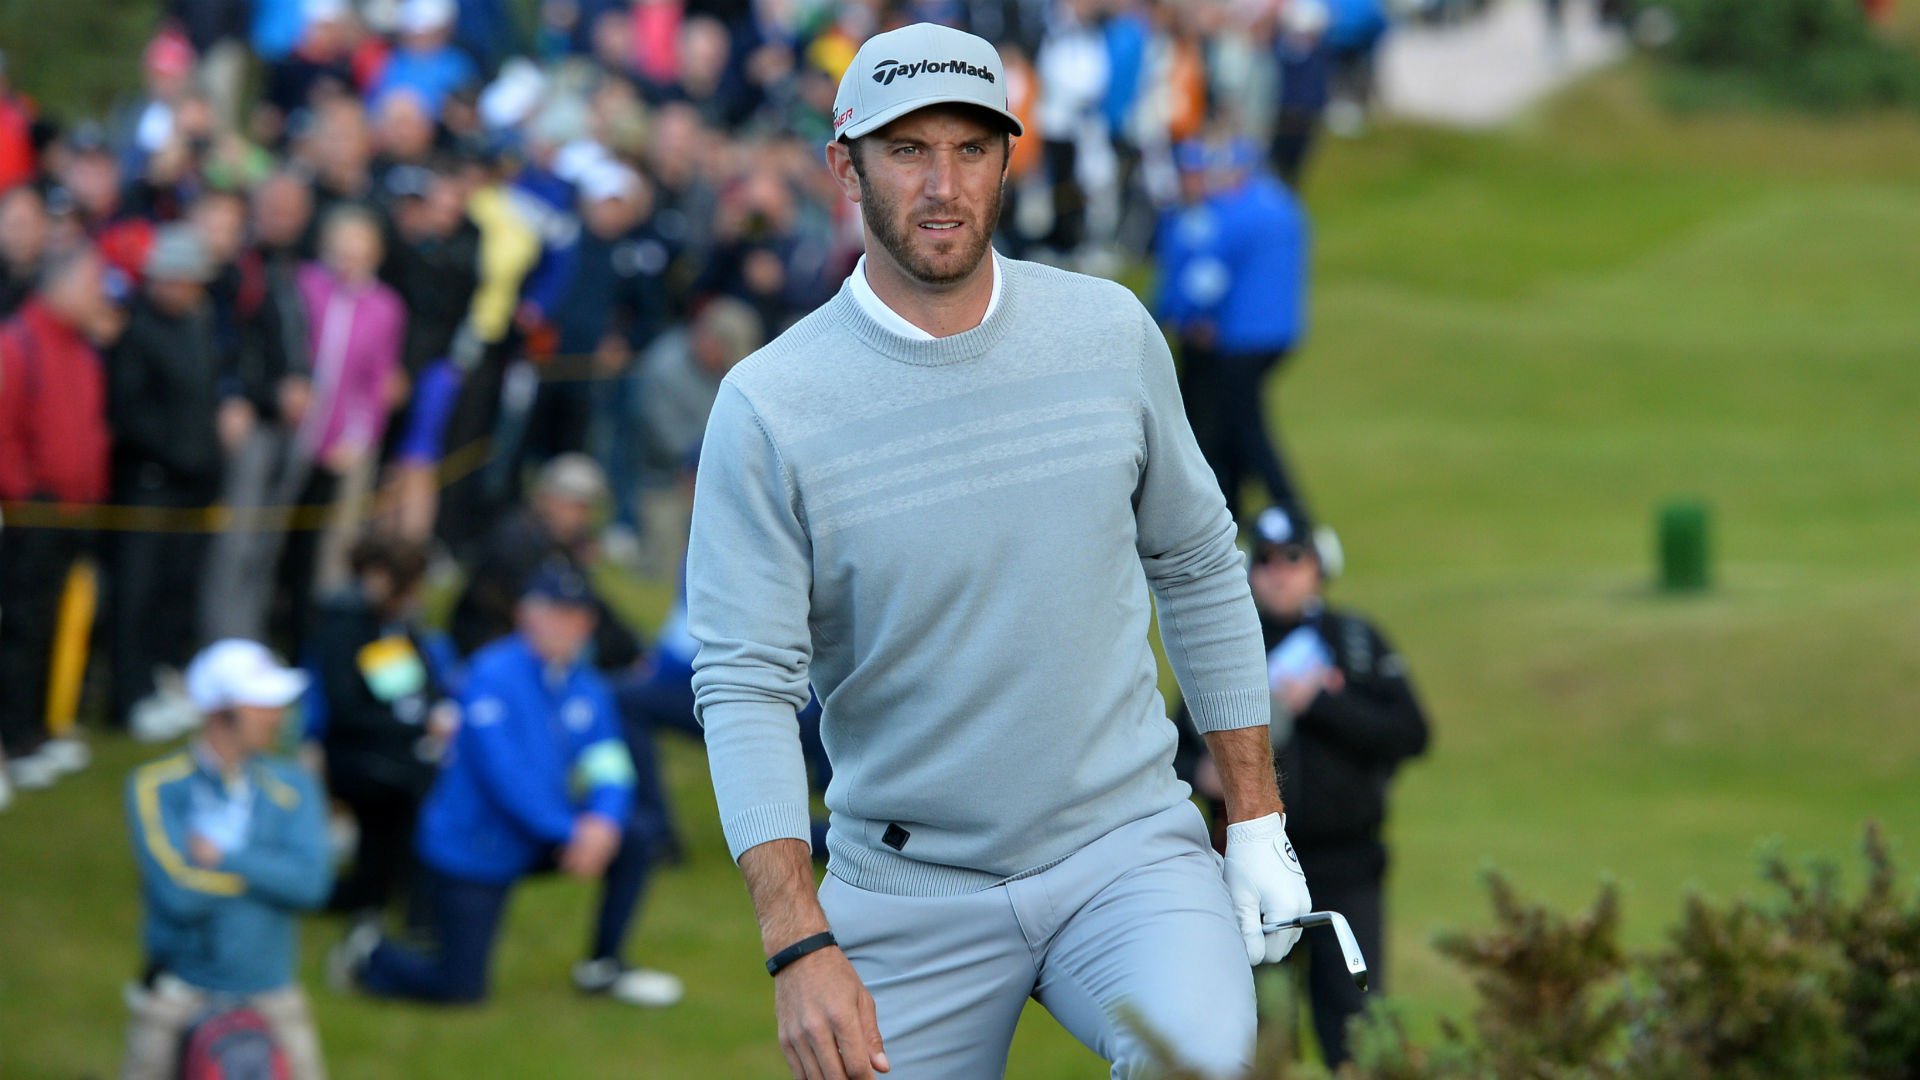 Flipboard: U.S. Open 2019: Dustin Johnson will try to escape his runner-up reputation